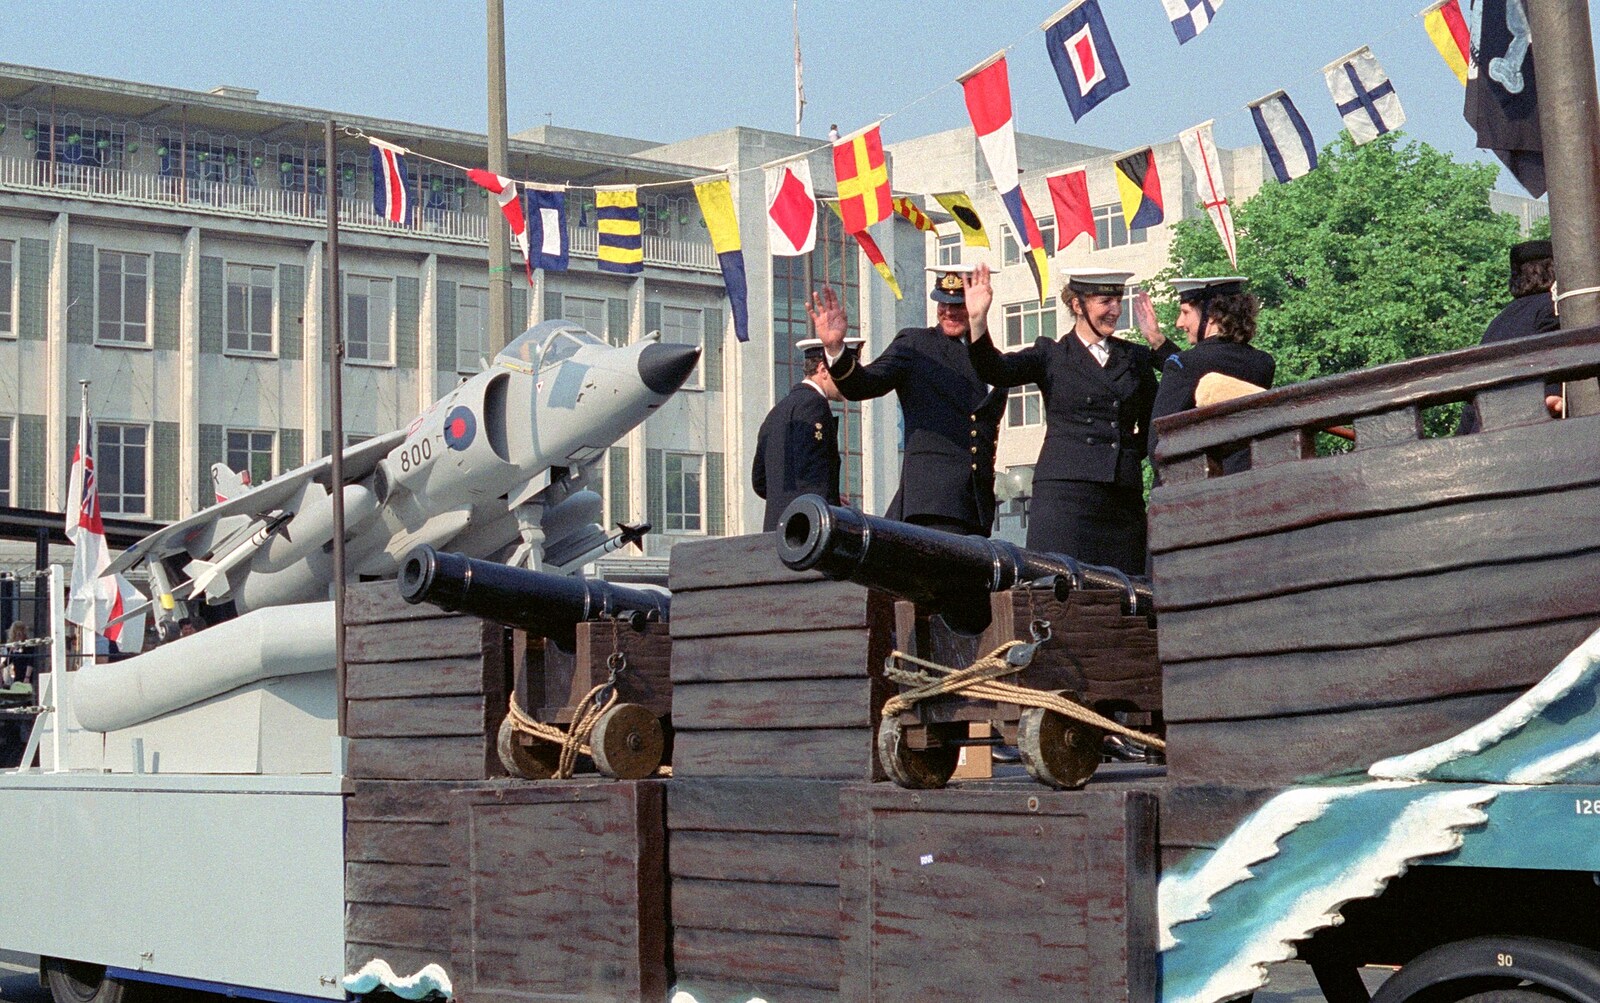 The Royal Navy float from Chantal and Andy's Wedding, and the Lord Mayor's Parade, Plymouth - 20th May 1987